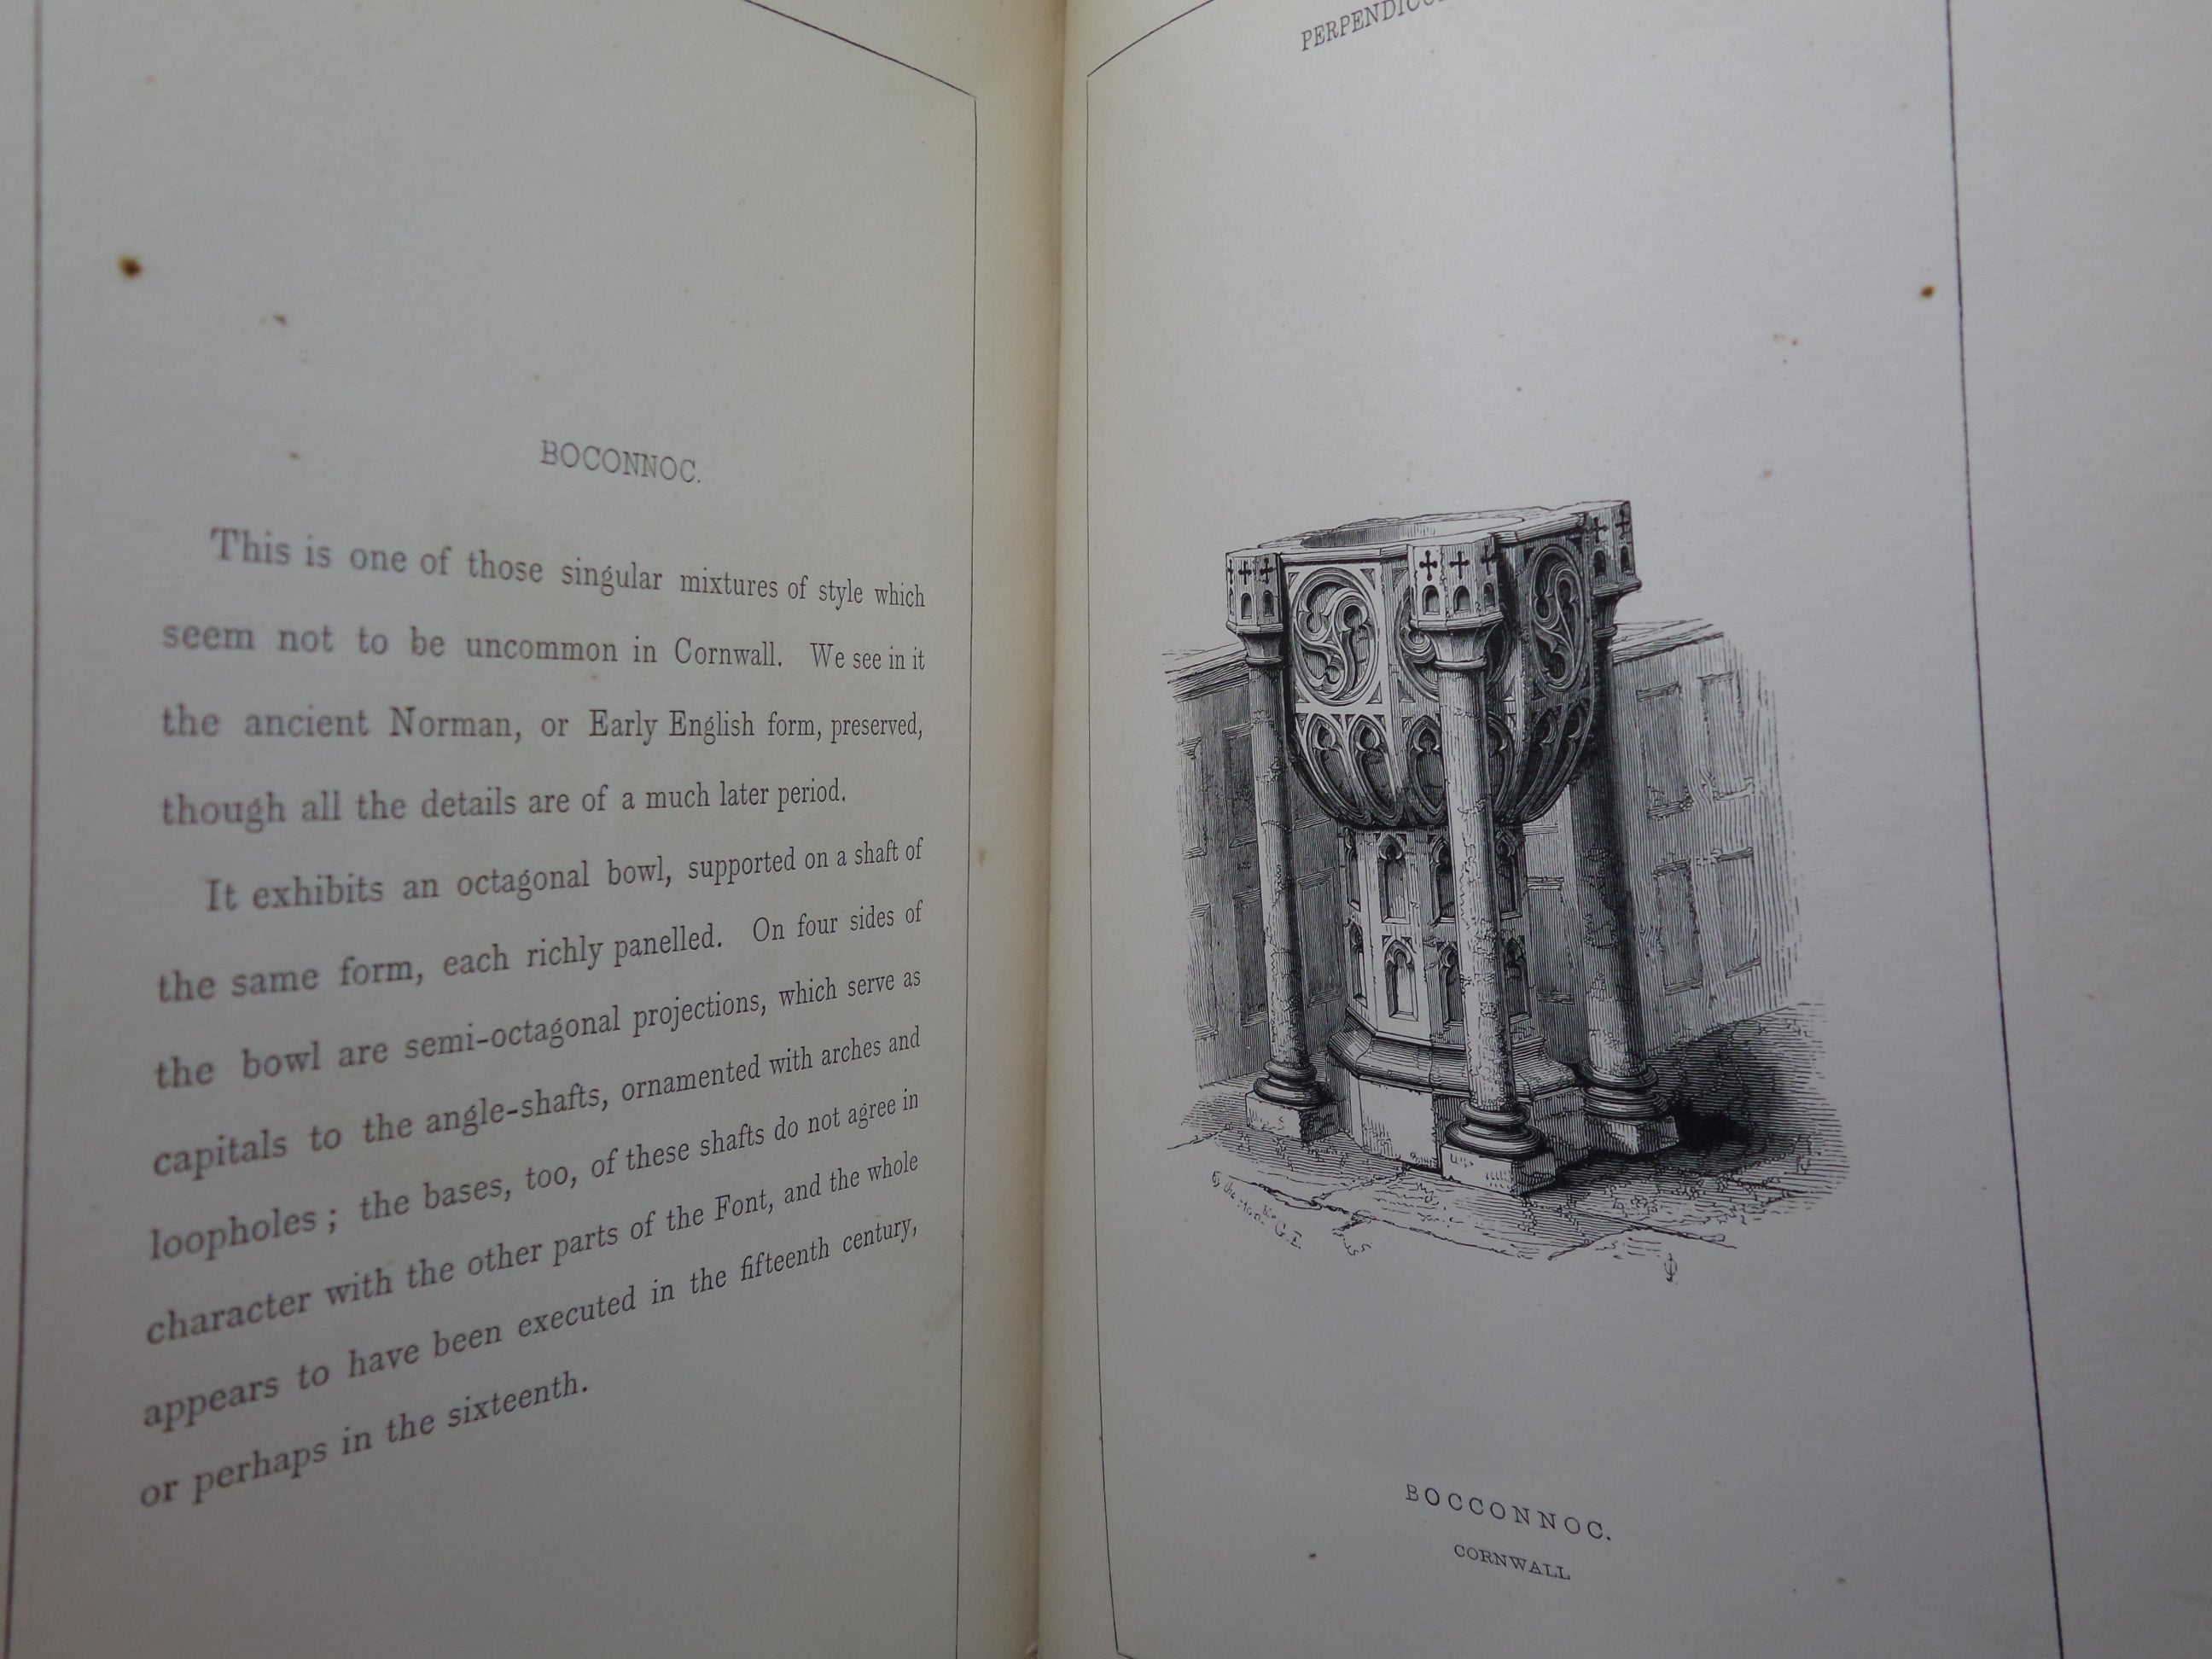 ILLUSTRATIONS OF BAPTISMAL FONTS BY THOMAS COMBE 1844 FIRST EDITION FINE BINDING